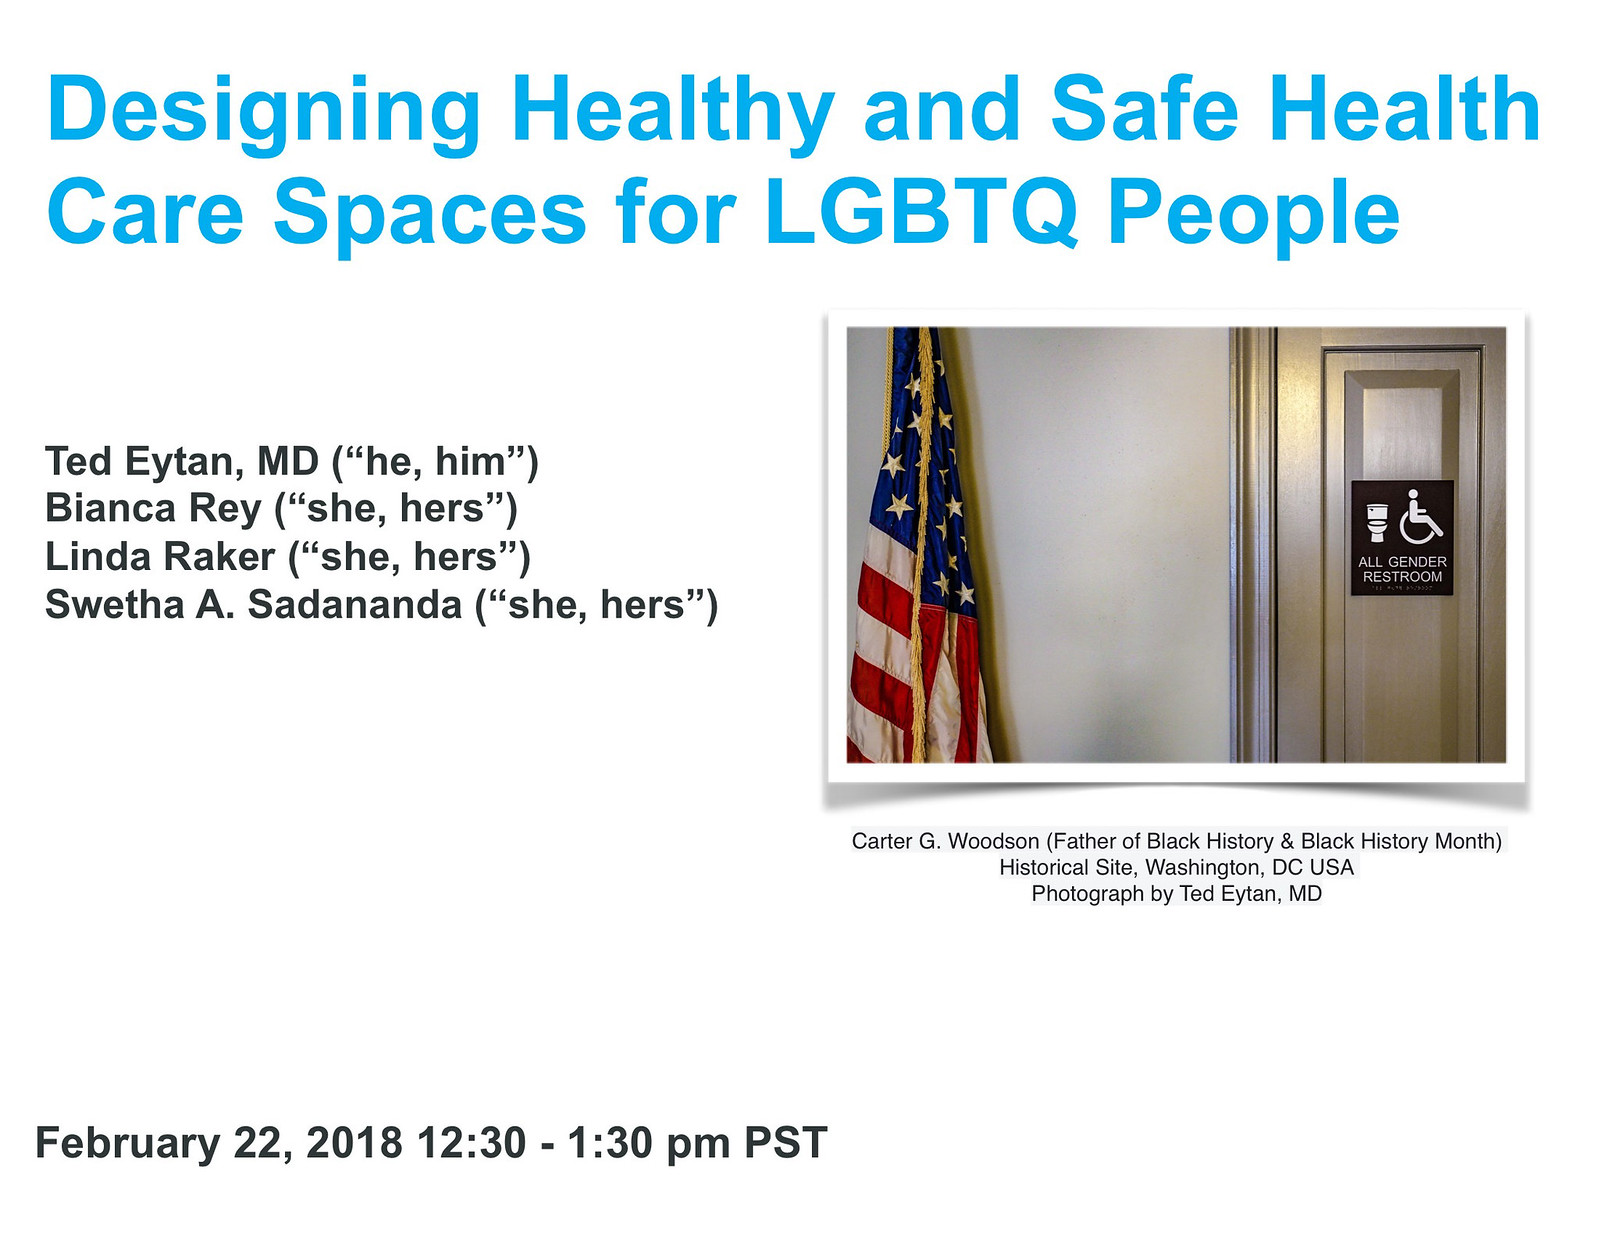 2018.02.28 Designing Healthy and Safe Health Care Spaces for LGBTQ People, Washington, DC USA 335